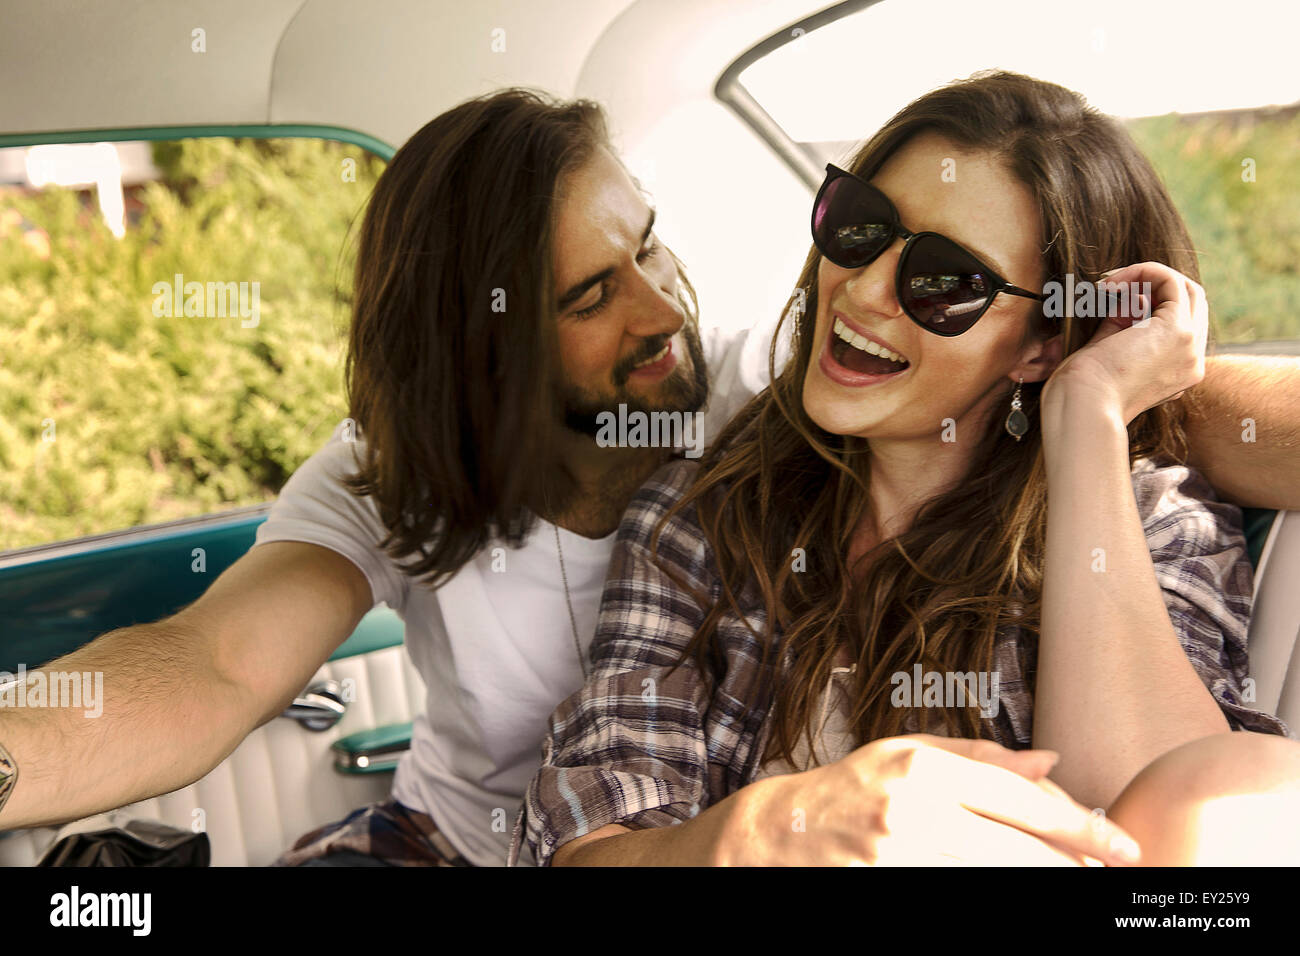 Young couple laughing in back seat of car Banque D'Images